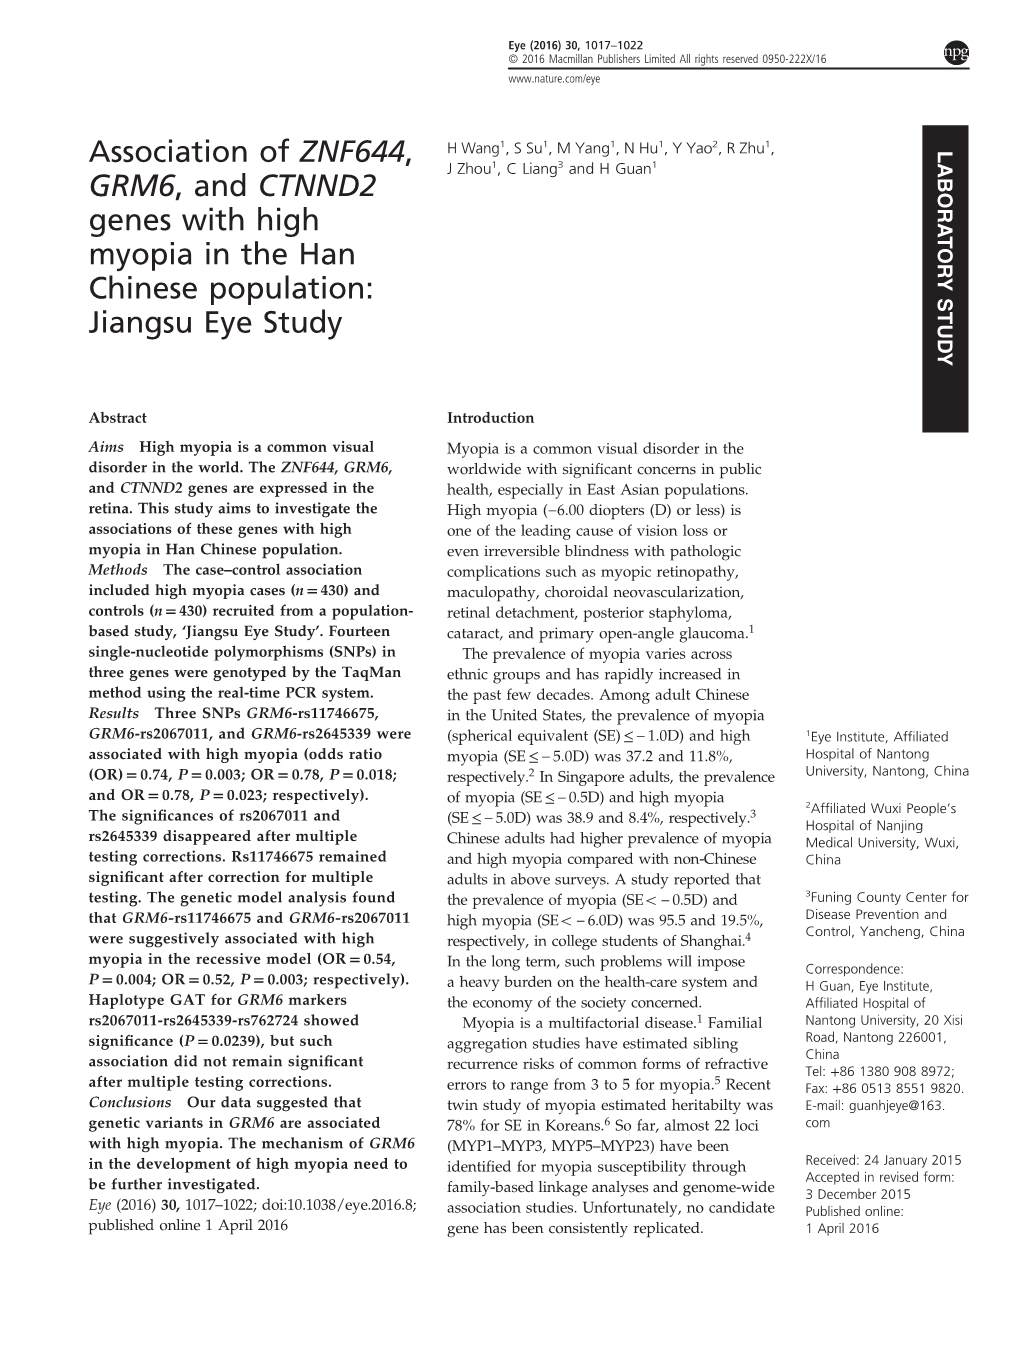 Association of ZNF644, GRM6, and CTNND2 Genes with High Myopia In